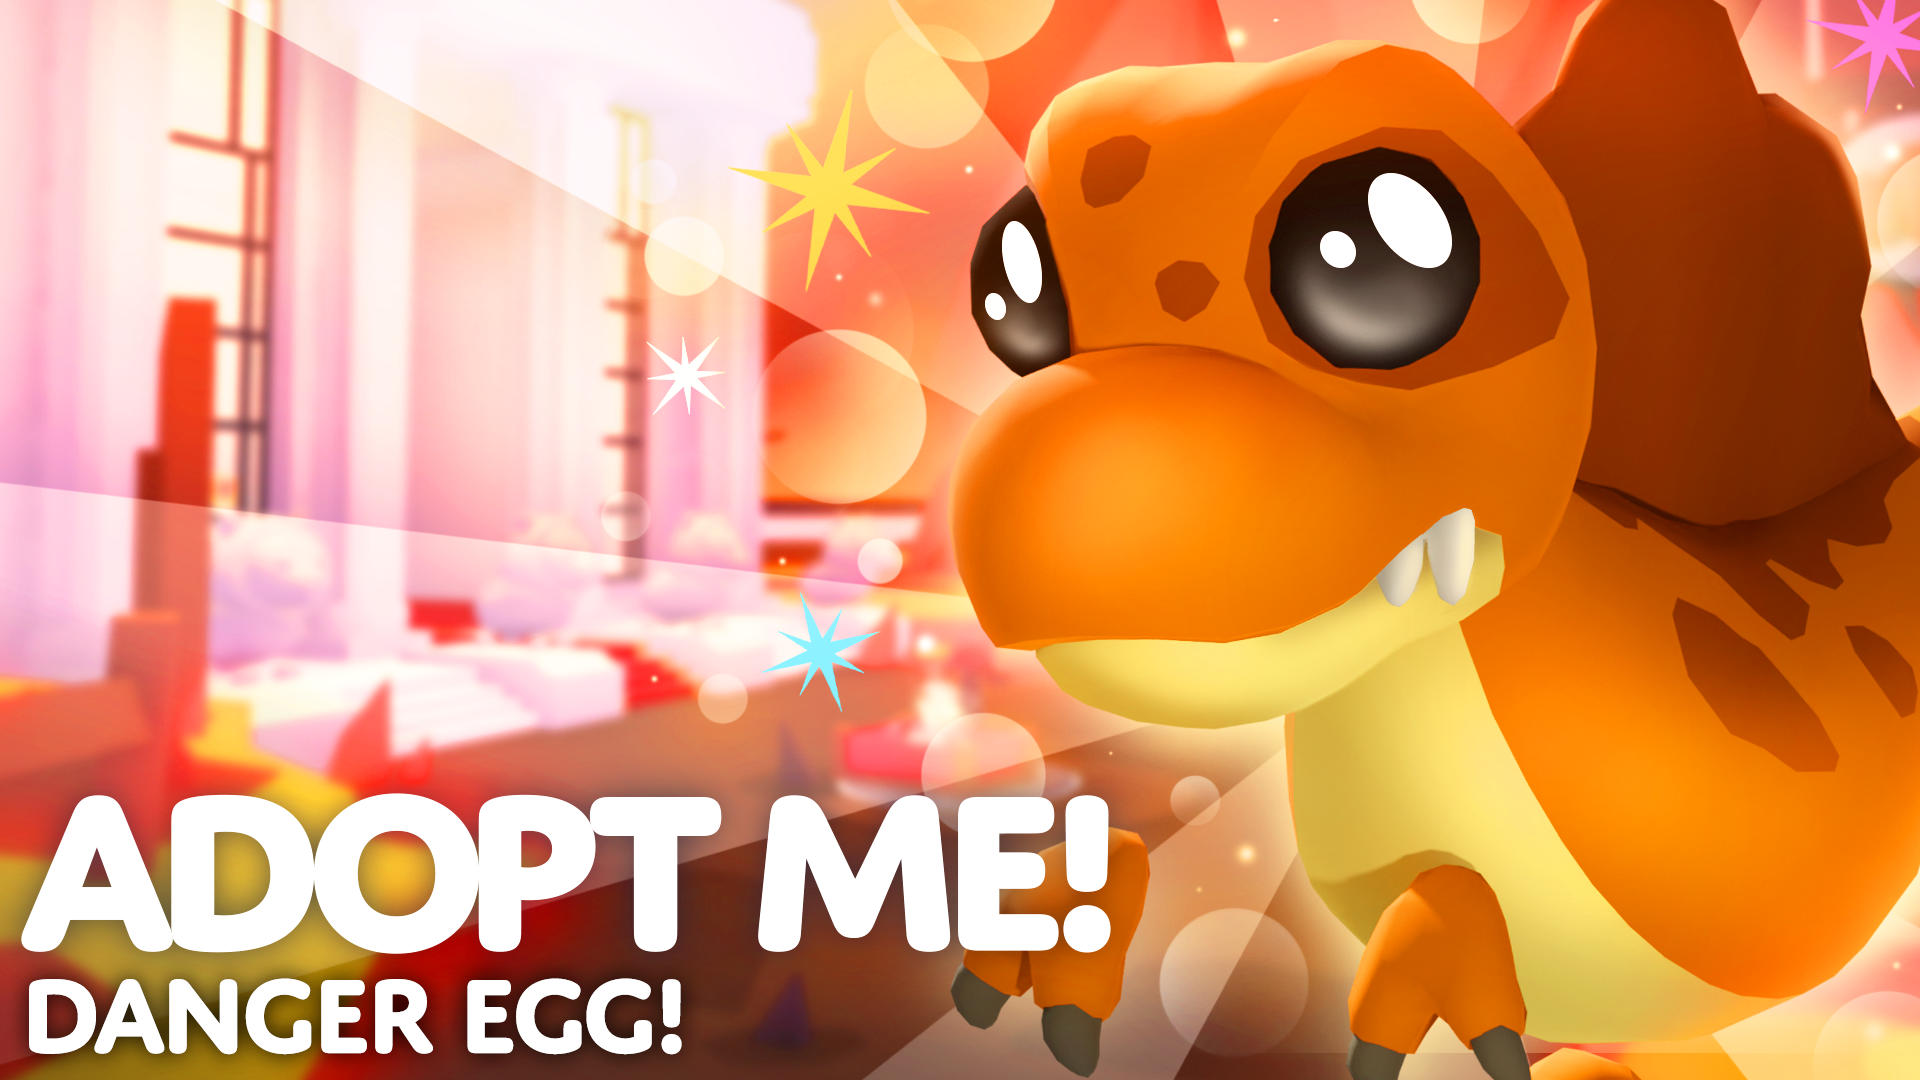 A Spinosaurus looms over the new, lava-themed nursery background. Text in the lower left reads "Adopt Me! Danger Egg!"